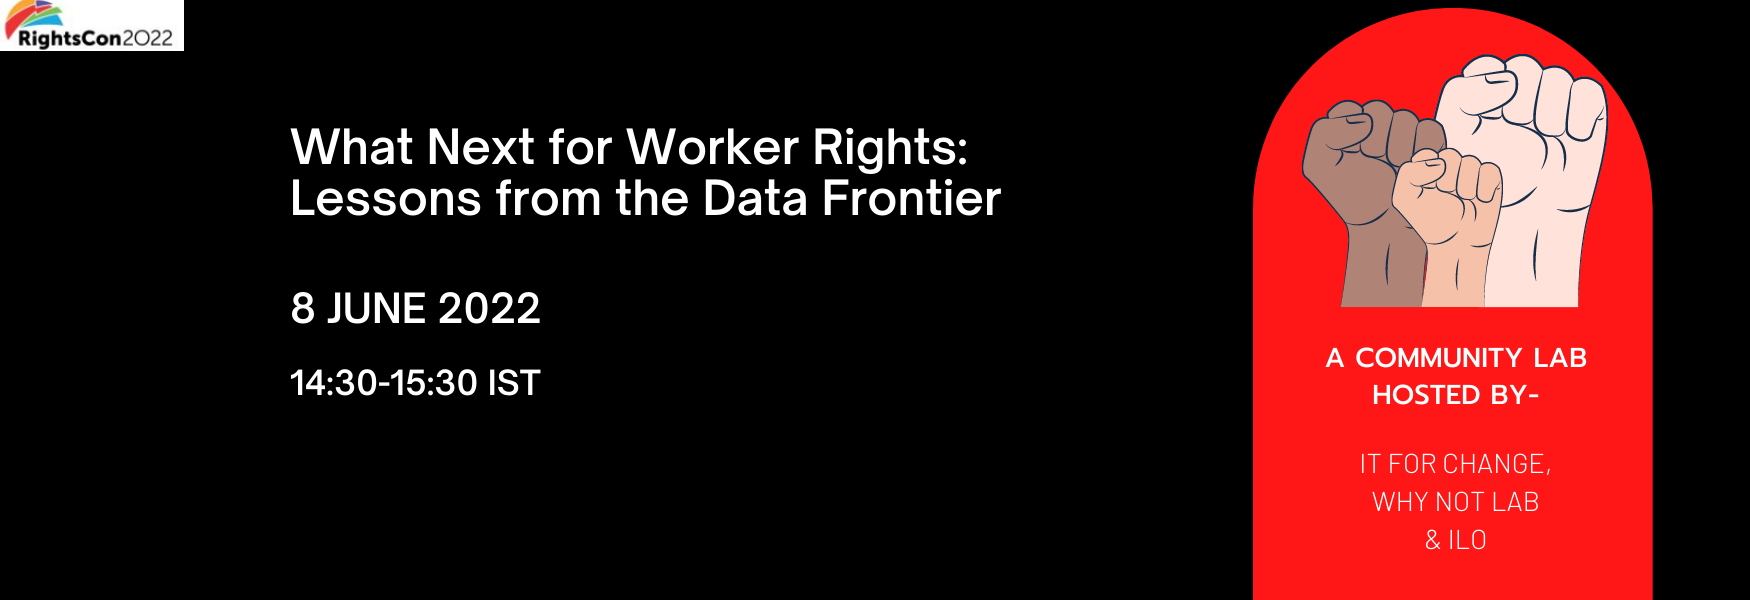 What Next for Worker Rights: Lessons from the Data Frontier